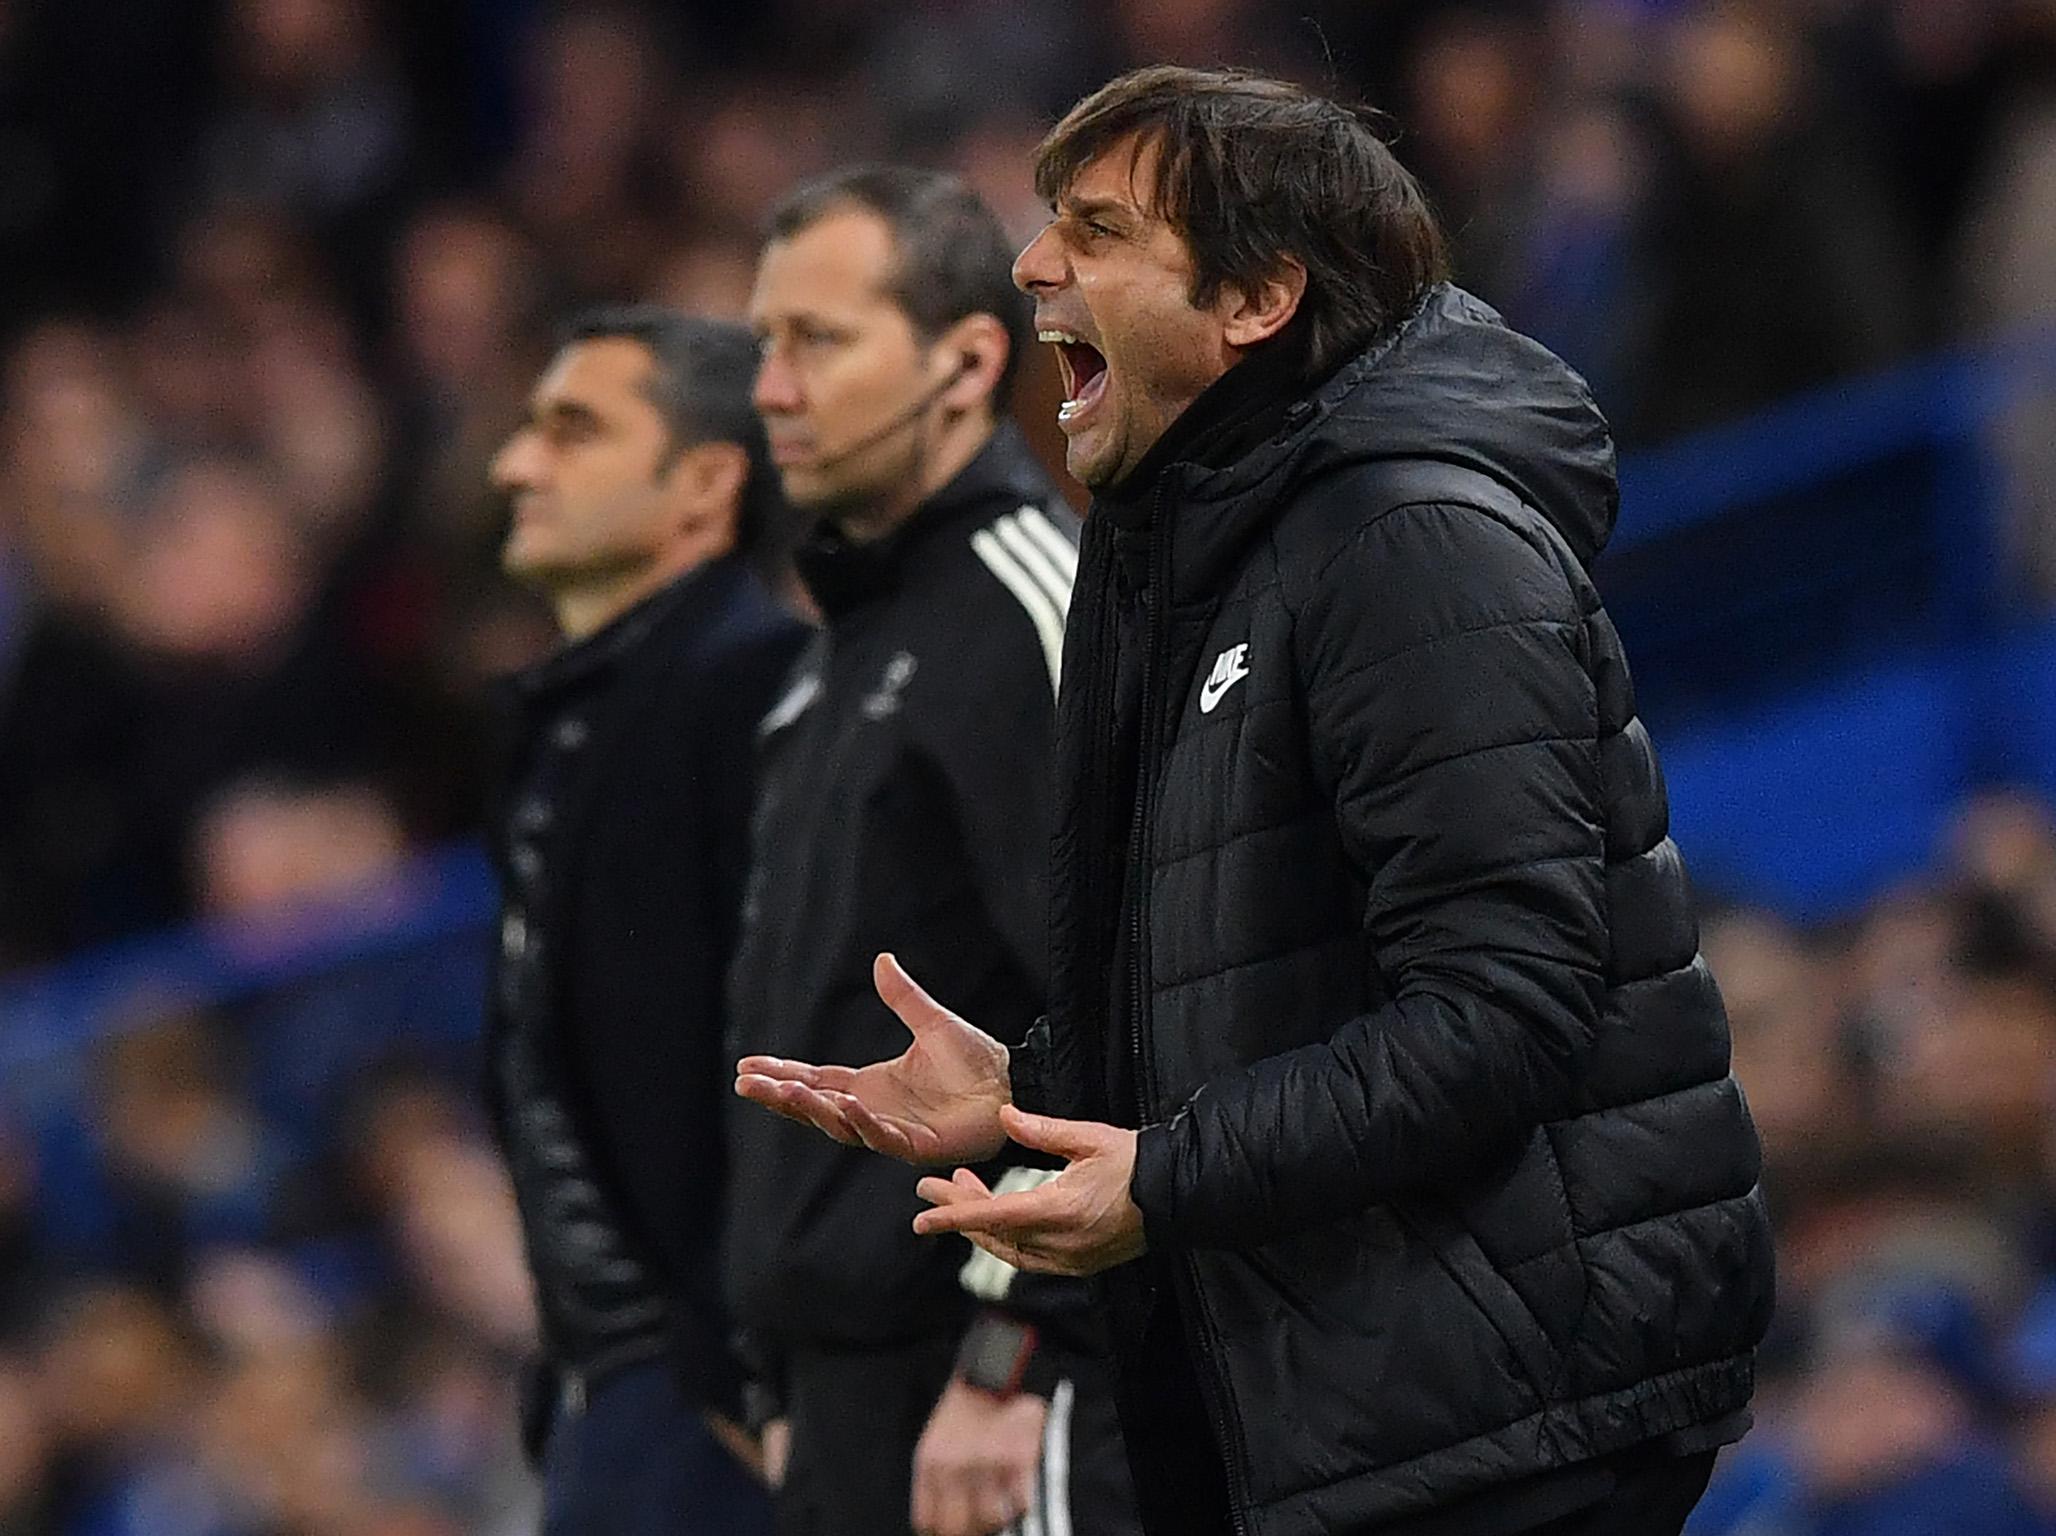 Antonio Conte directs his team from the touchline